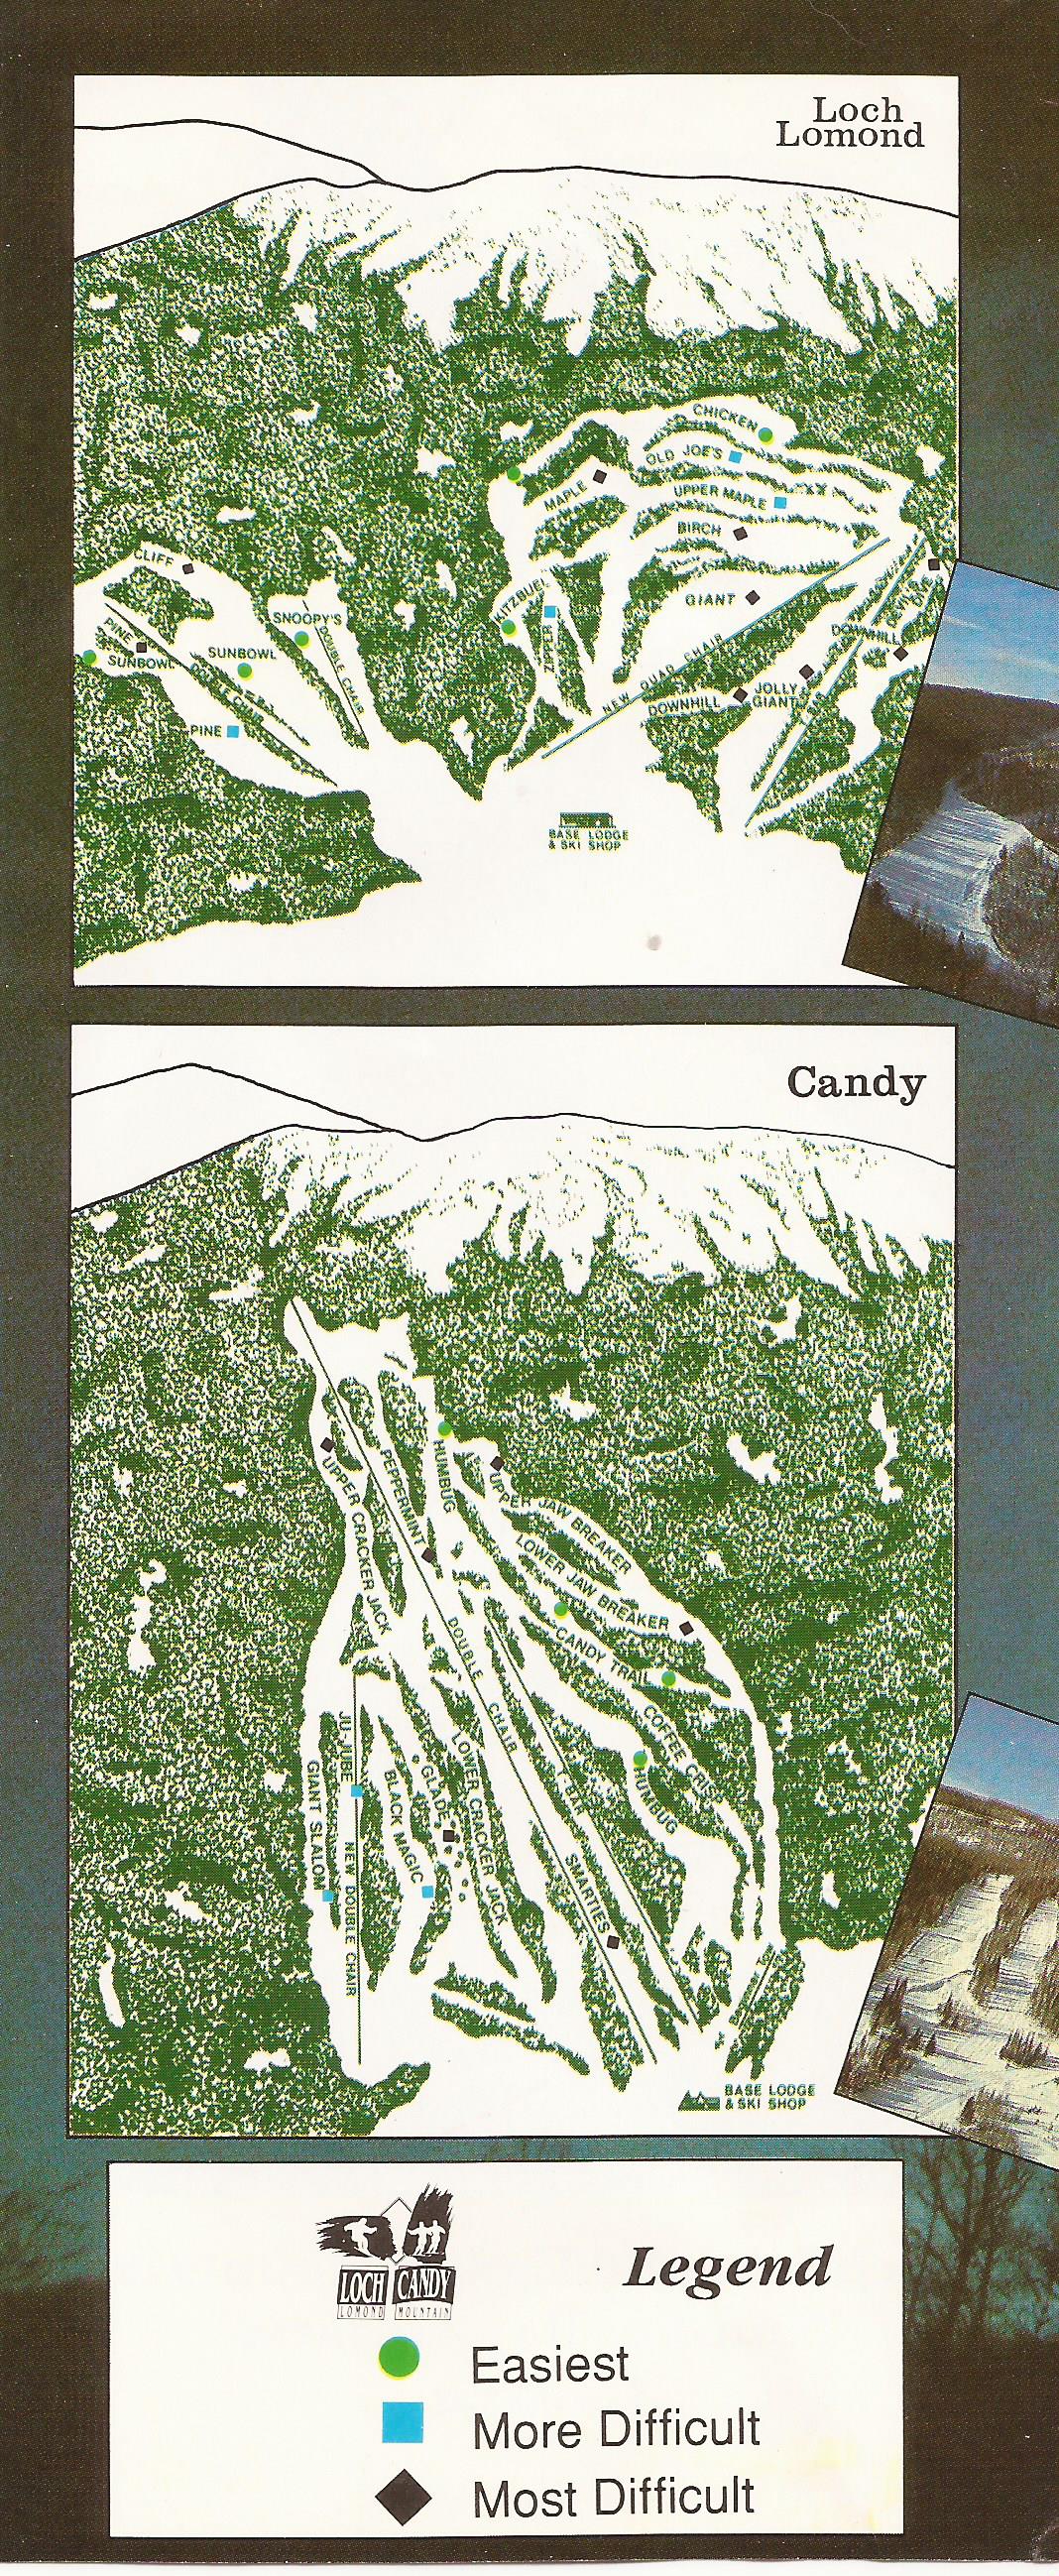 When Candy Mtn. & Loch Lomond operated together